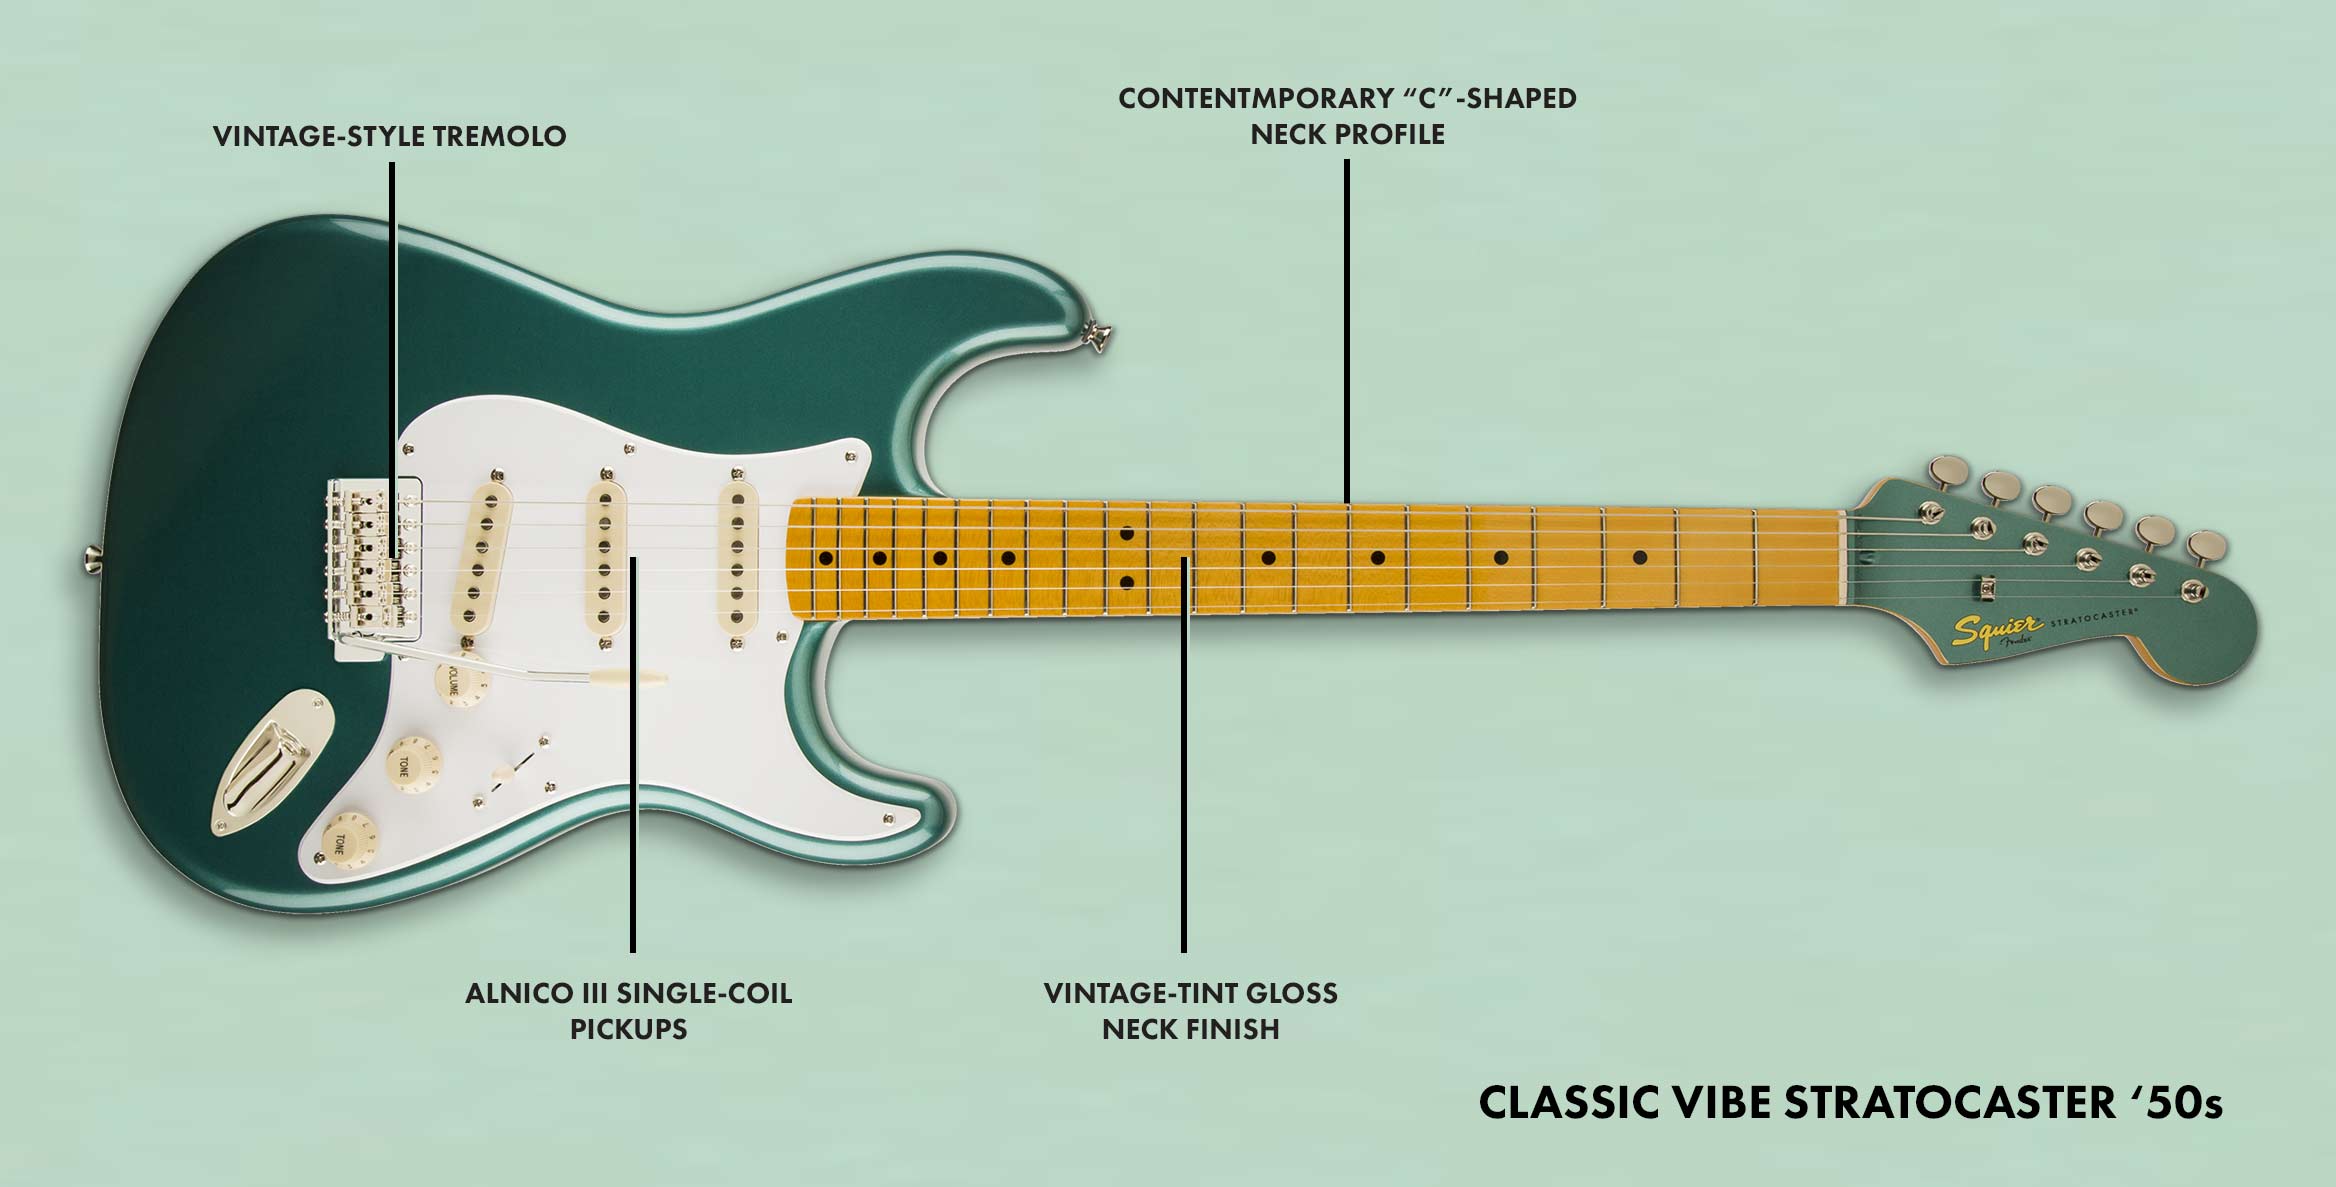 Fender Squier Bullet Strat Wiring Diagram from images.contentful.com